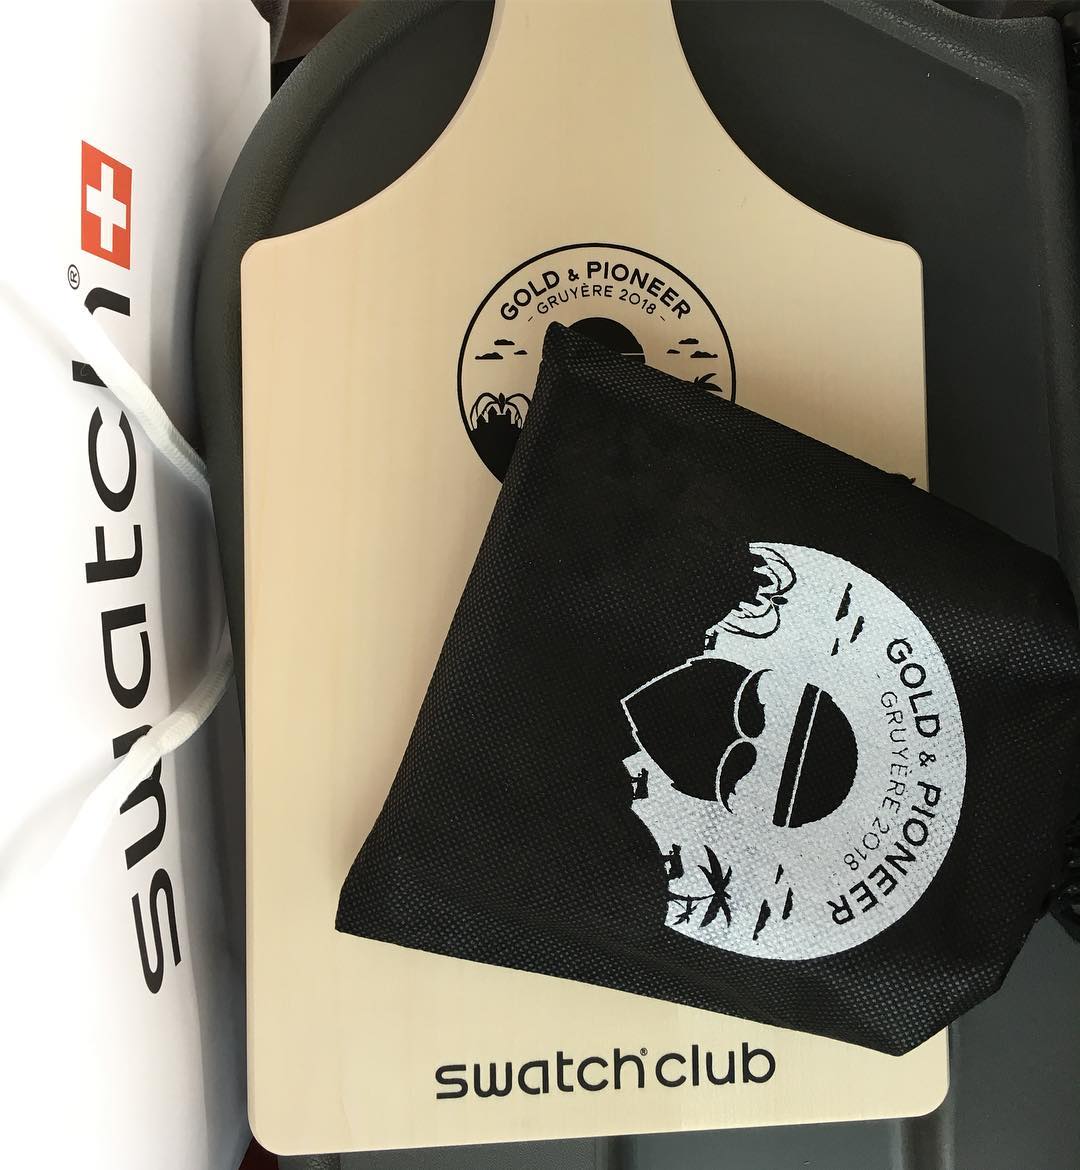 Little surprise from Swatch Club